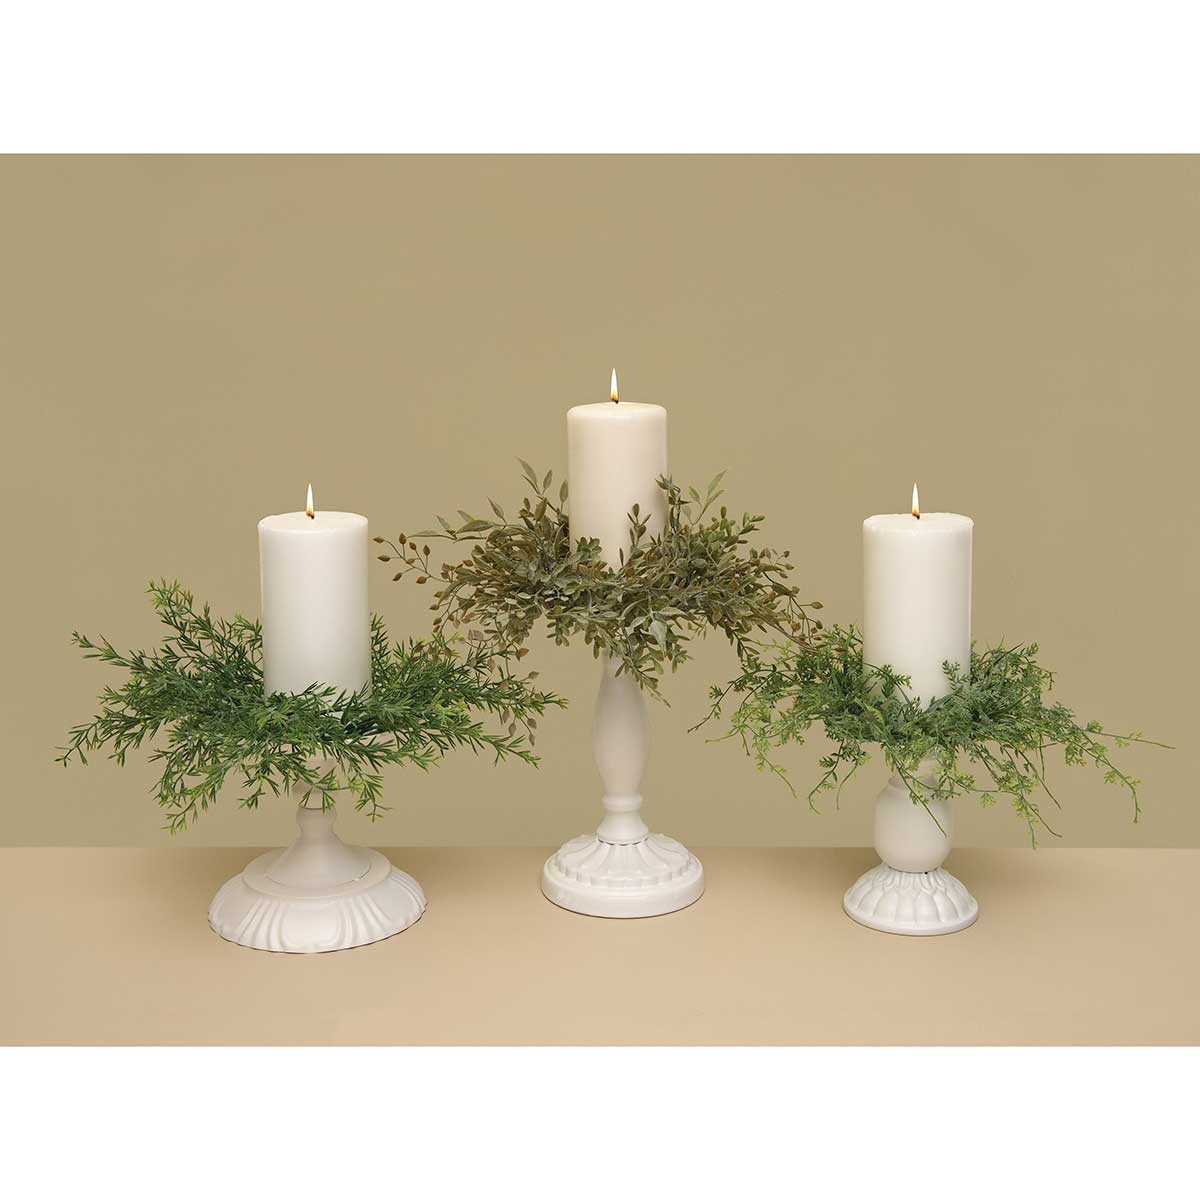 CANDLE RING FERN 12IN (INNER RING 3.5IN) GREEN